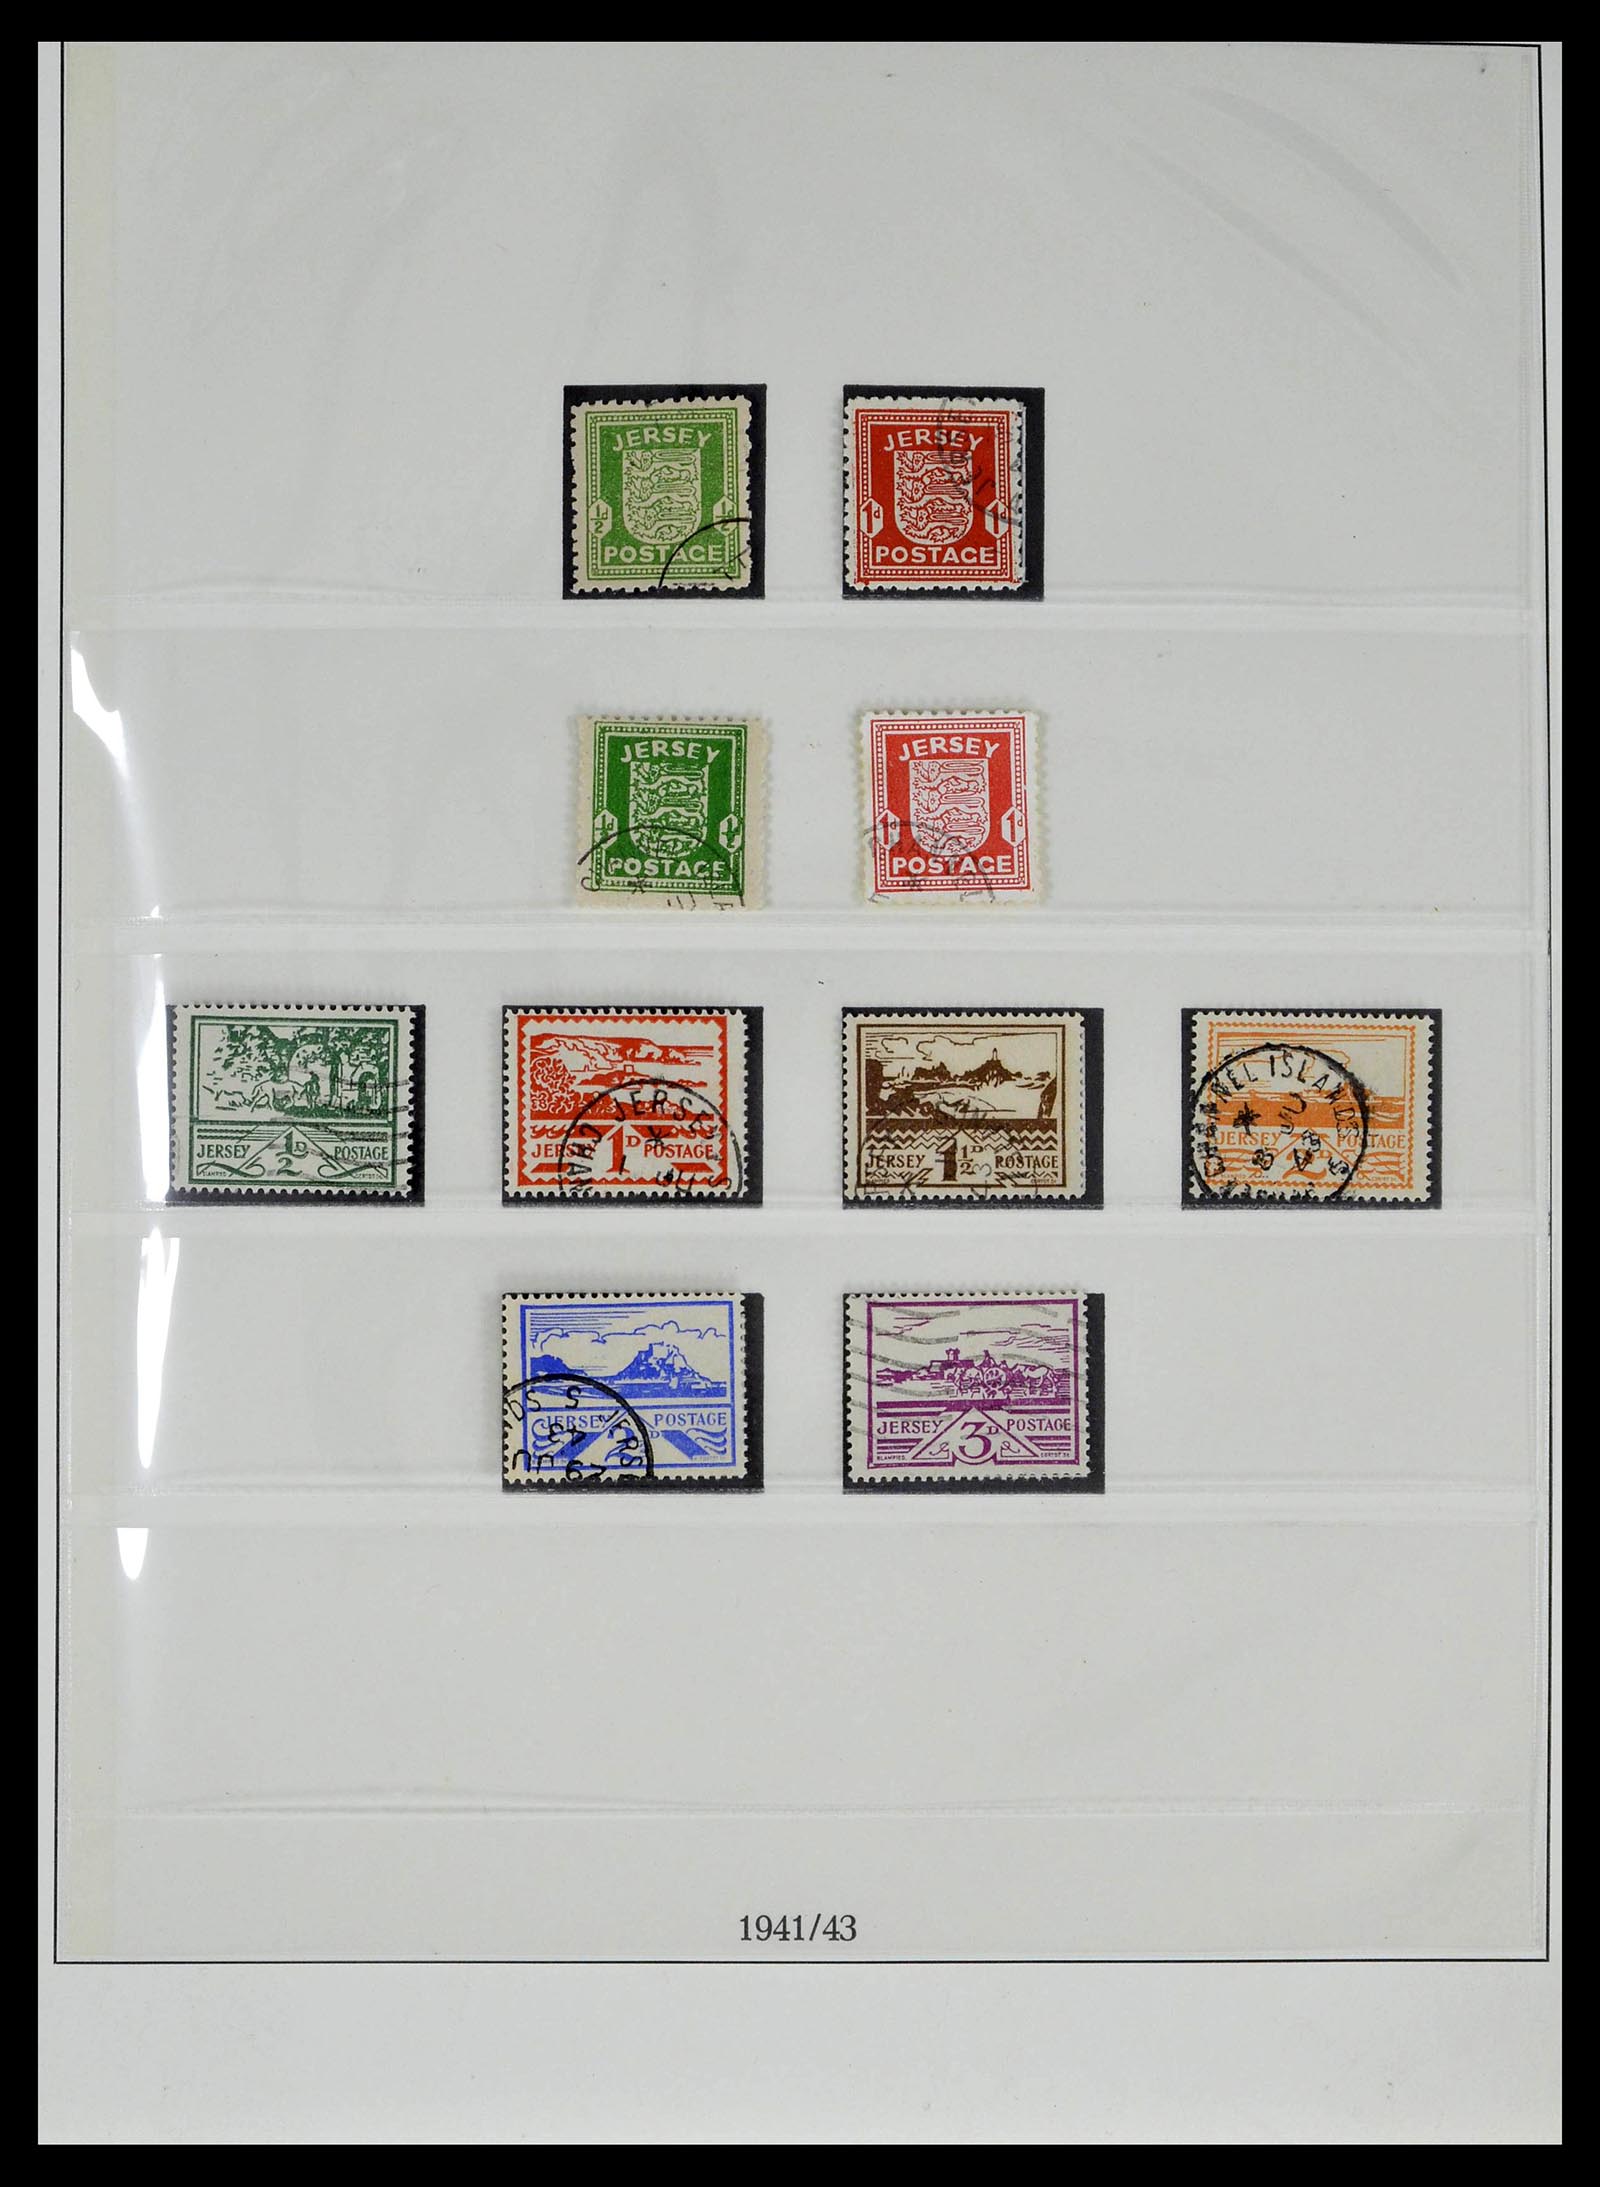 39396 0006 - Stamp collection 39396 German occupation WW II 1939-1945.